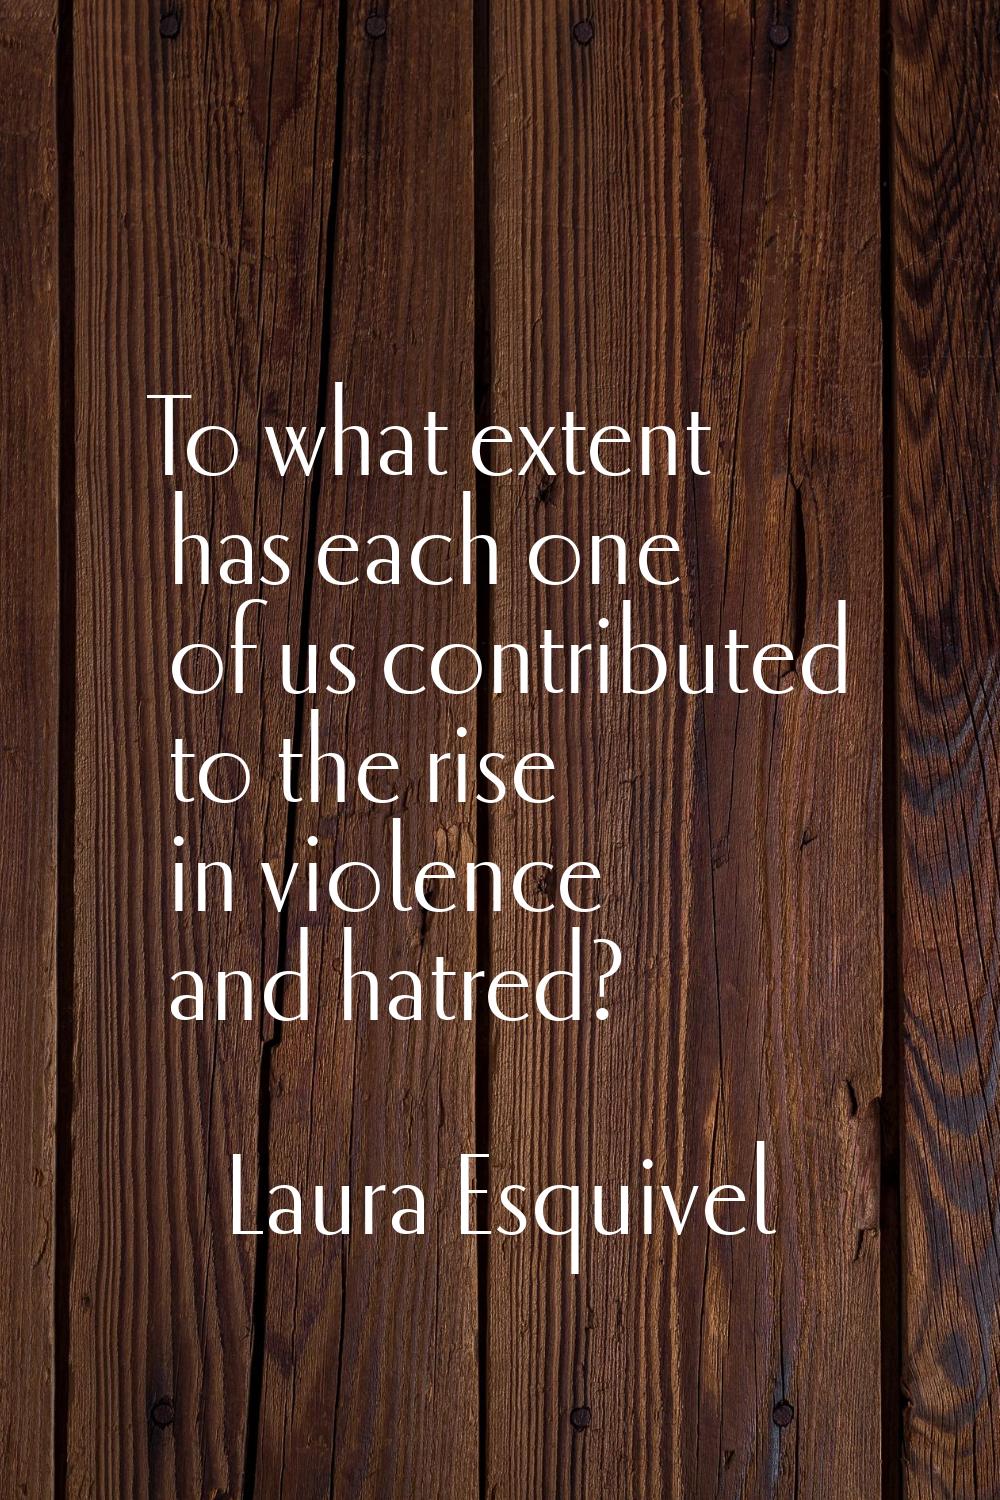 To what extent has each one of us contributed to the rise in violence and hatred?